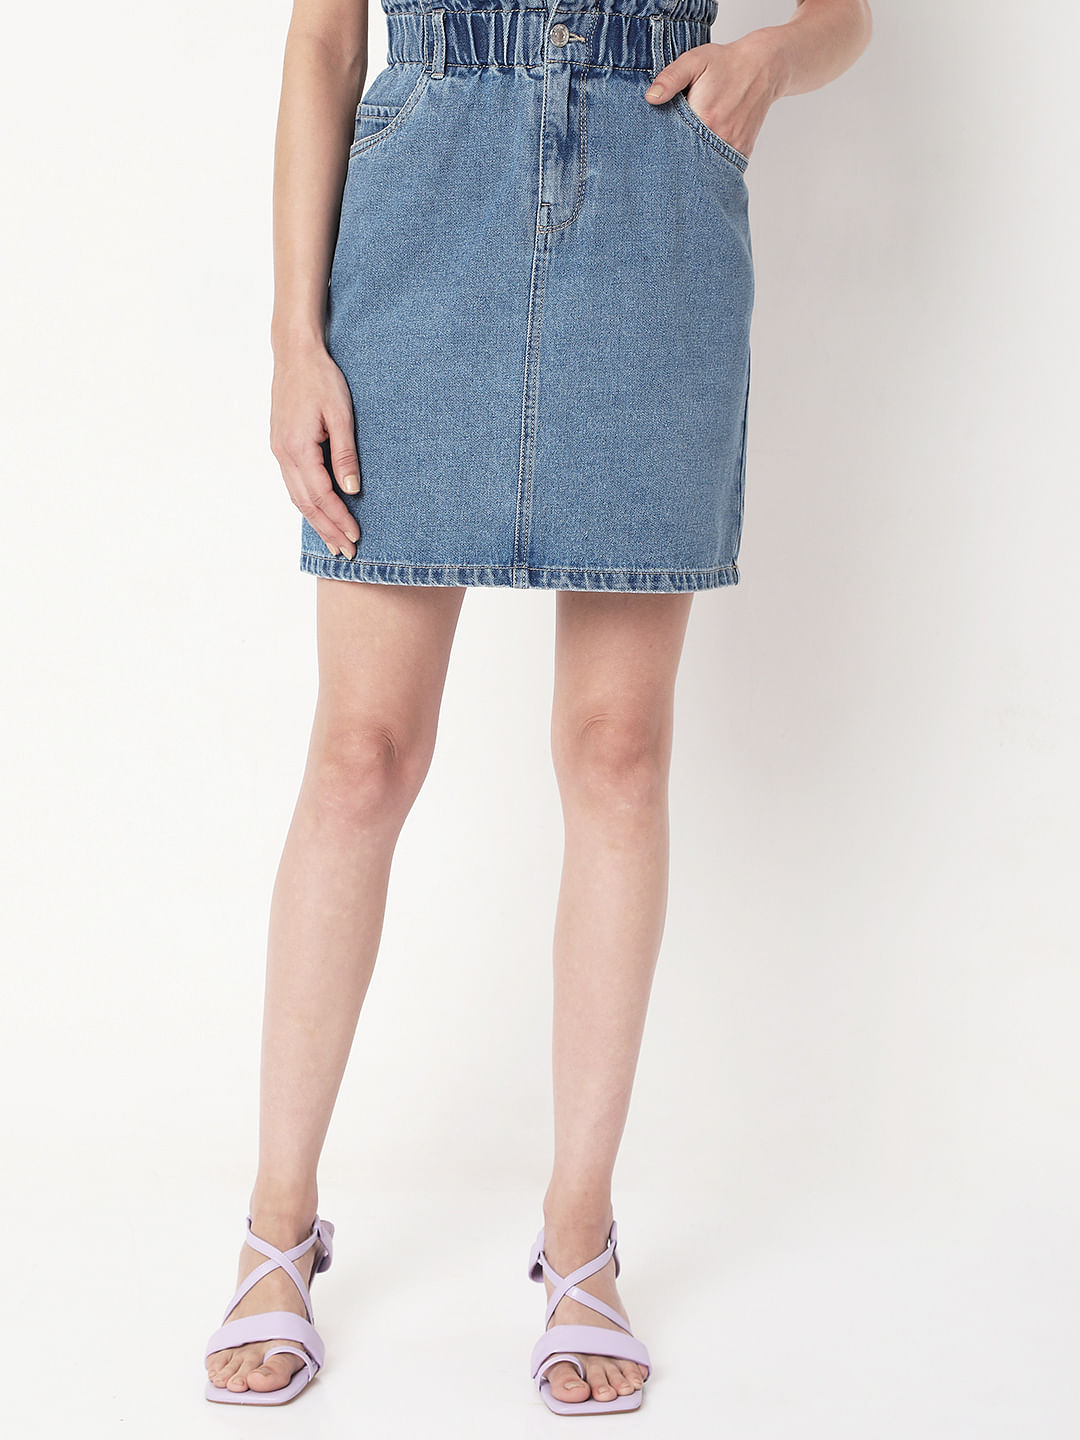 Women's Casual Distressed Ripped A-Line Denim Short Skirt Button Down Front Denim  Short Skirt with Side Pocket at Amazon Women's Clothing store